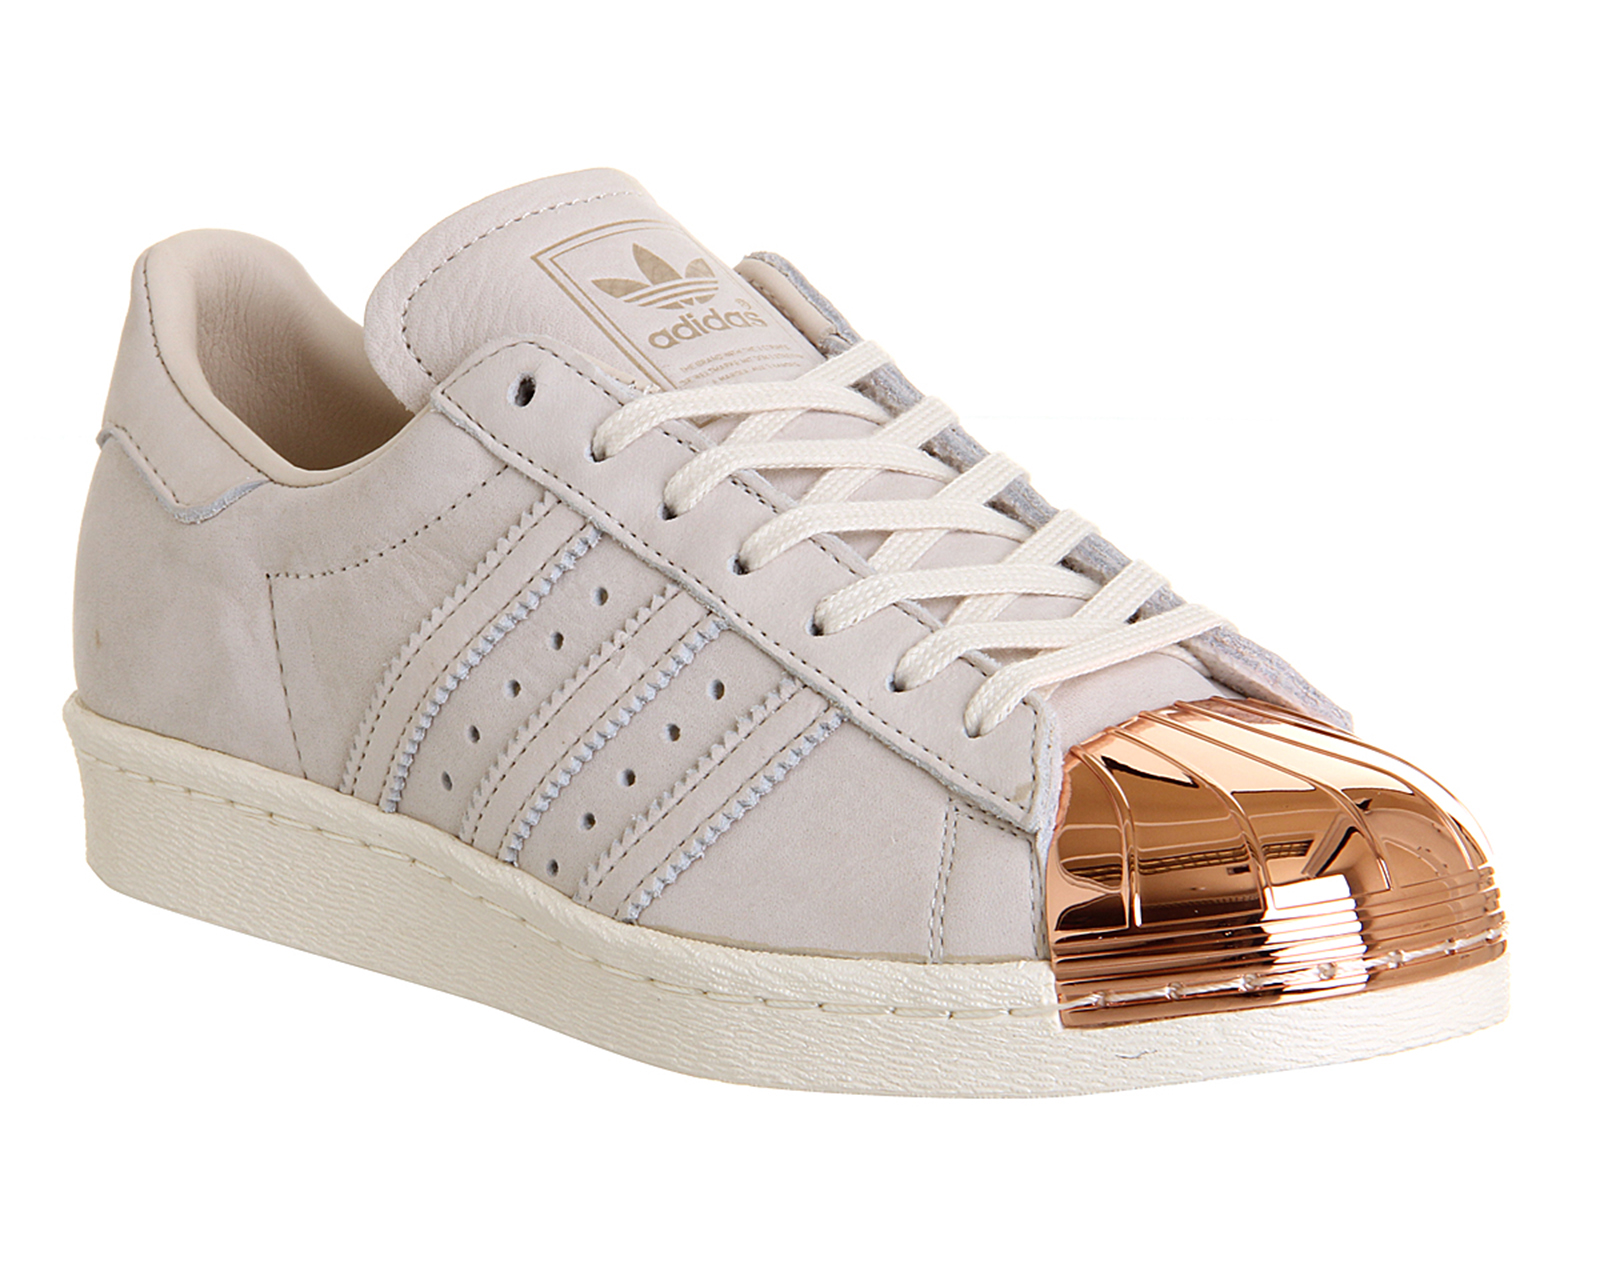 adidas shoes with gold plate